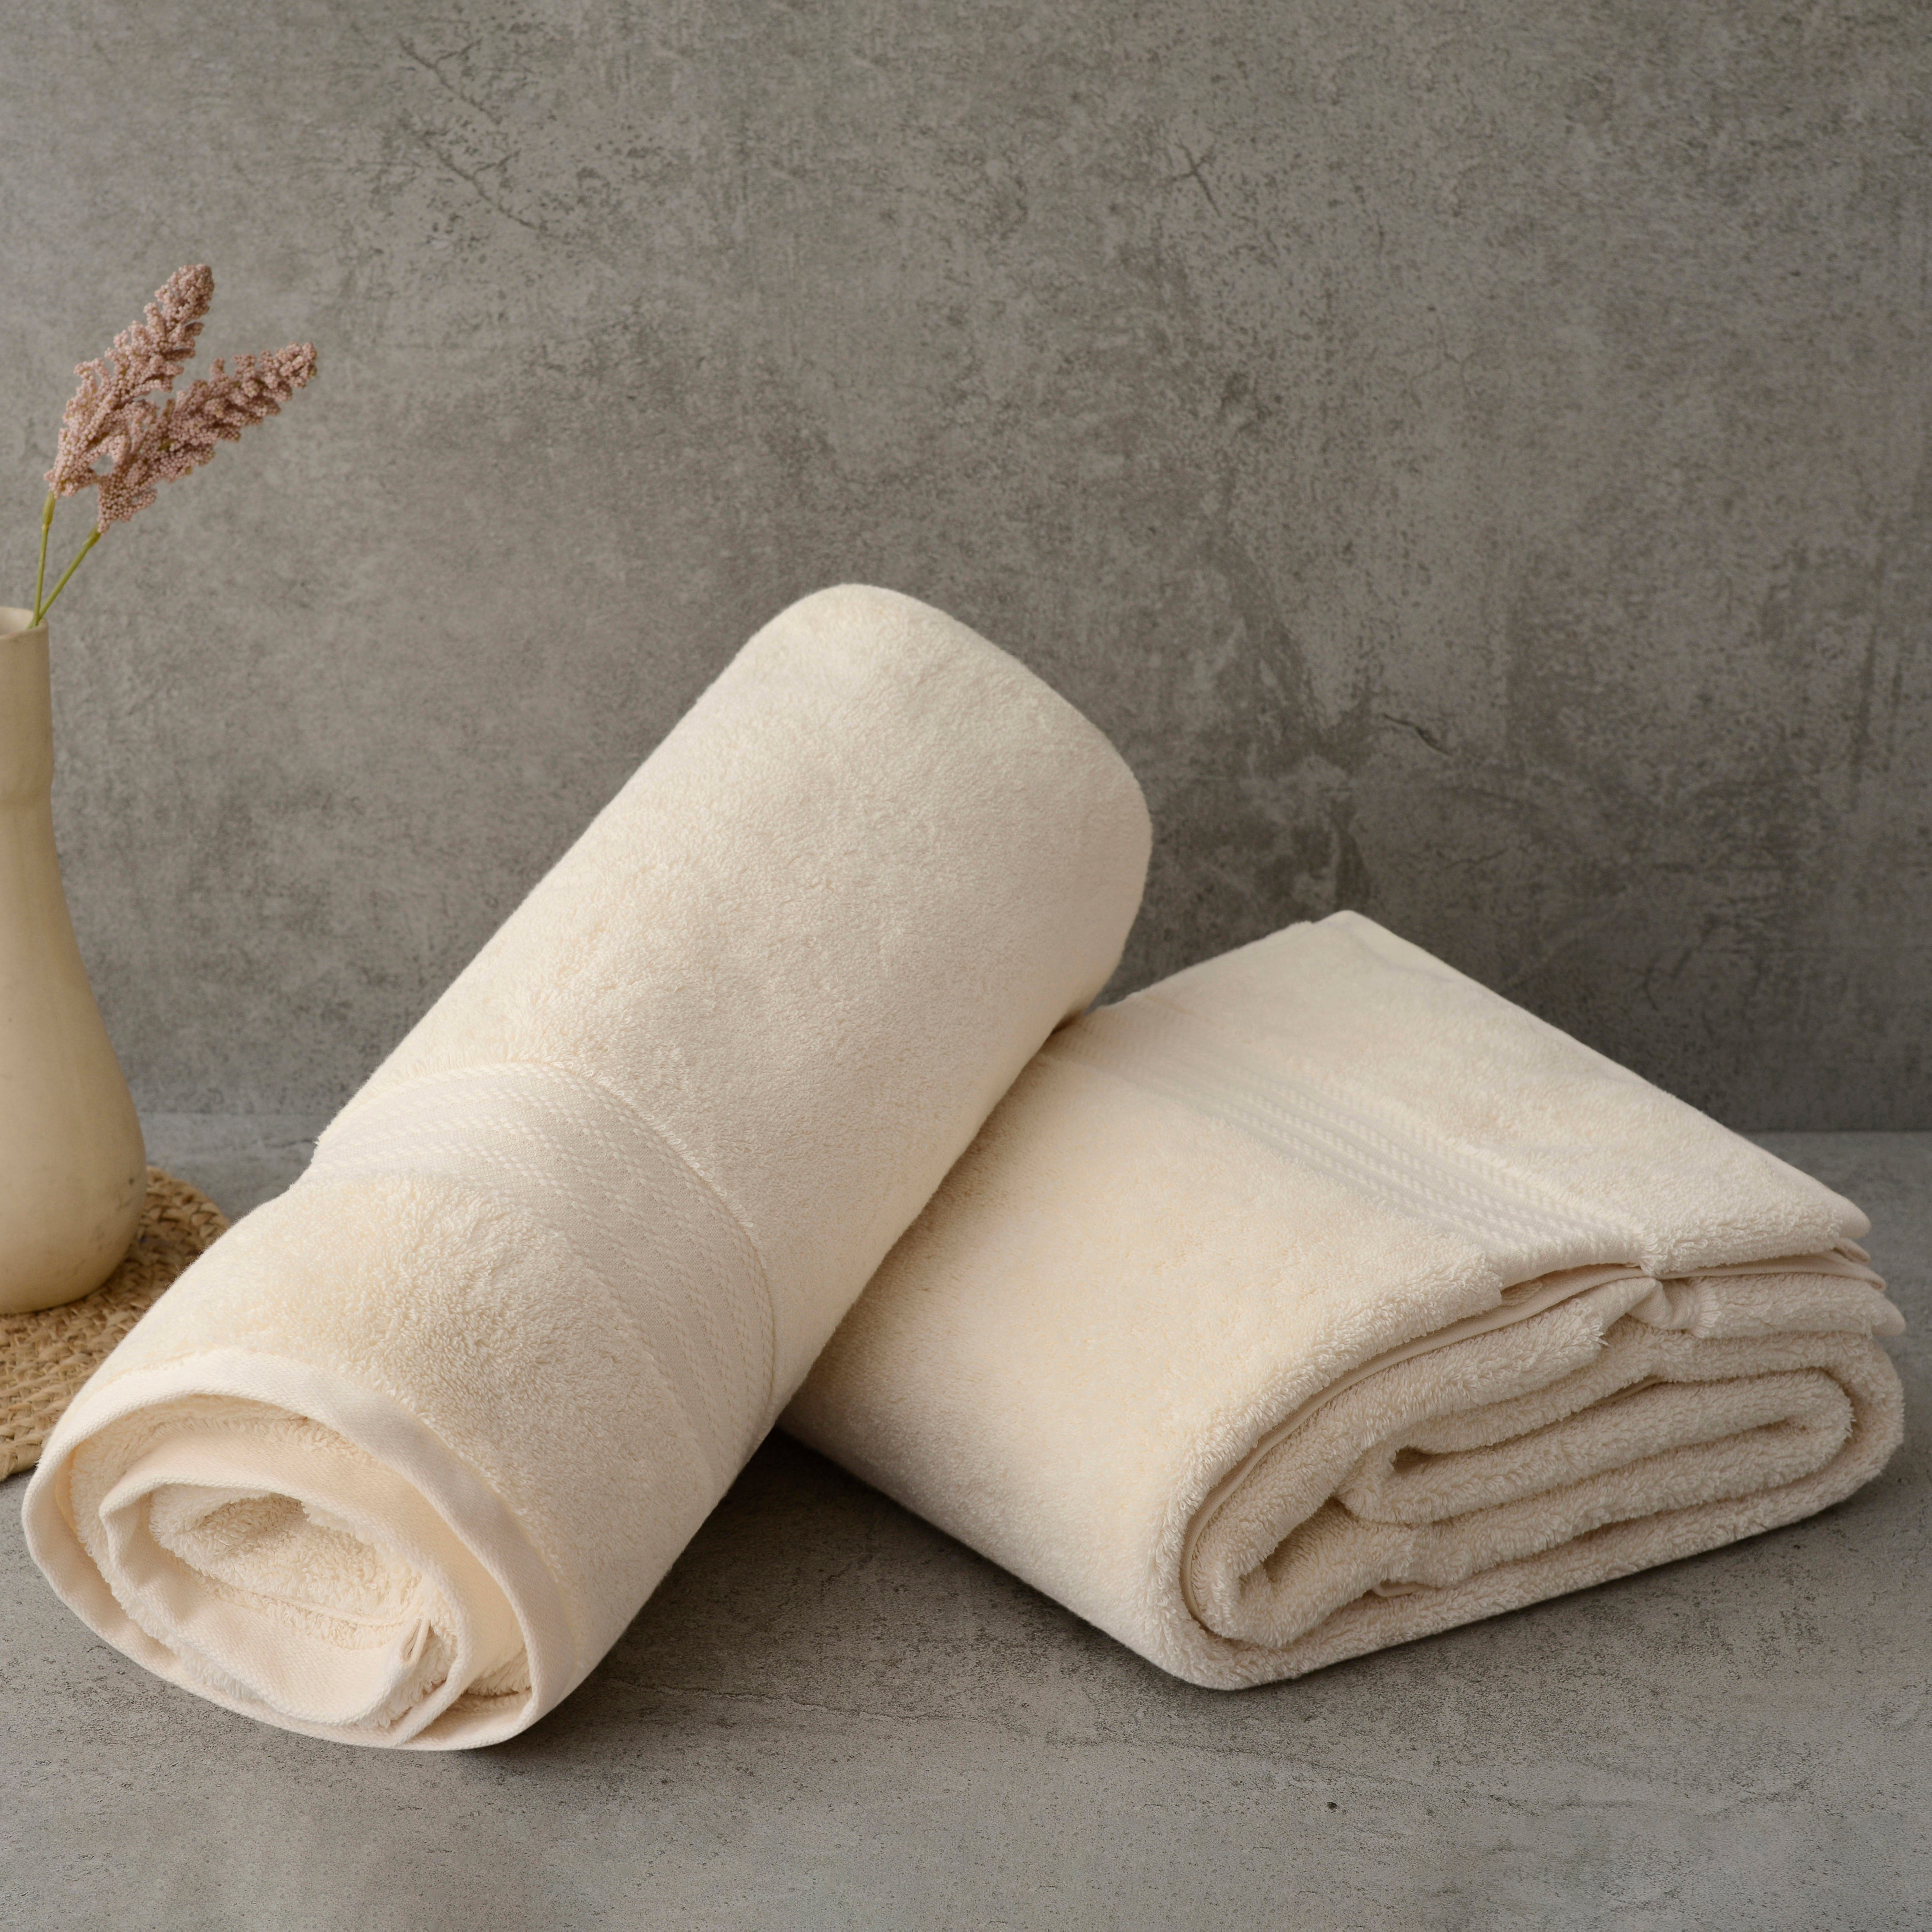 Organic Towel Collection for Pure Comfort | Fabdreams Organic